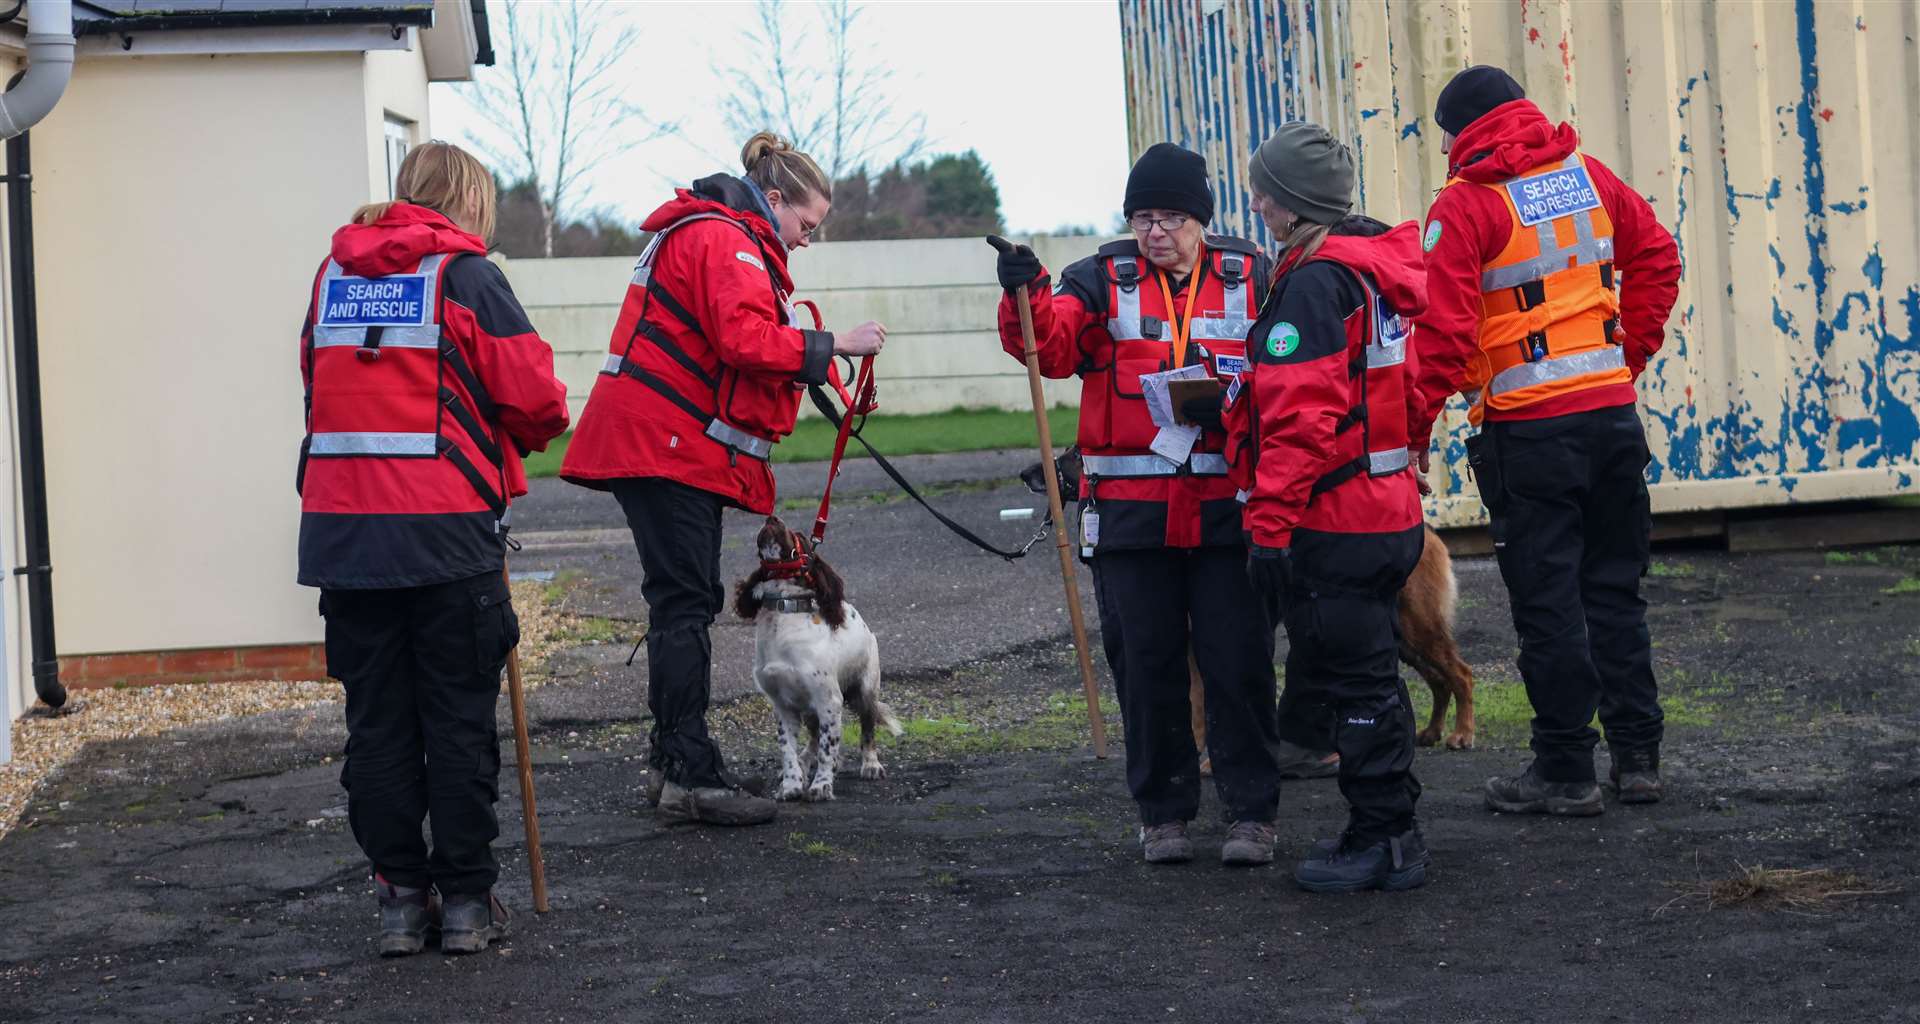 The coastguard search and rescue team seen on Friday helping in the search for McConnell in Dover. Picture: UKNiP